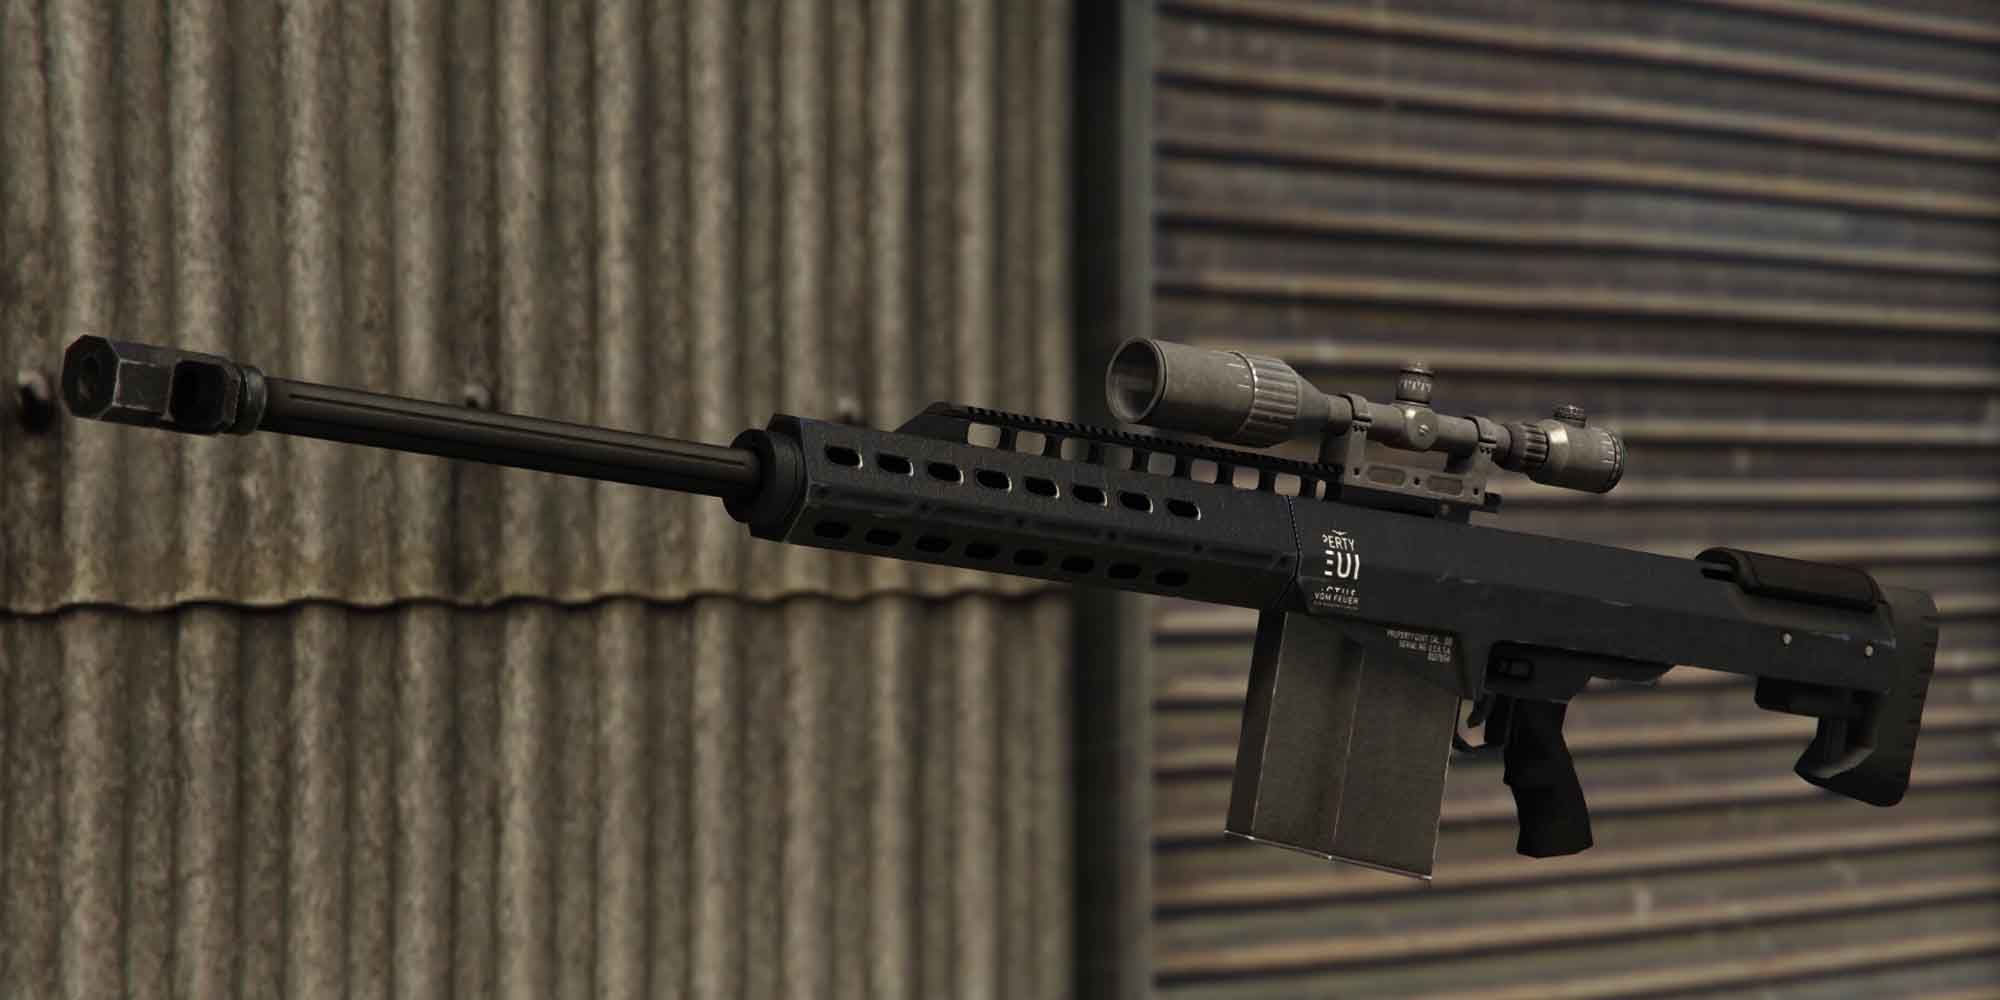 The Heavy Sniper in GTA 5 allows for extreme long range shots with pinpoint accuracy